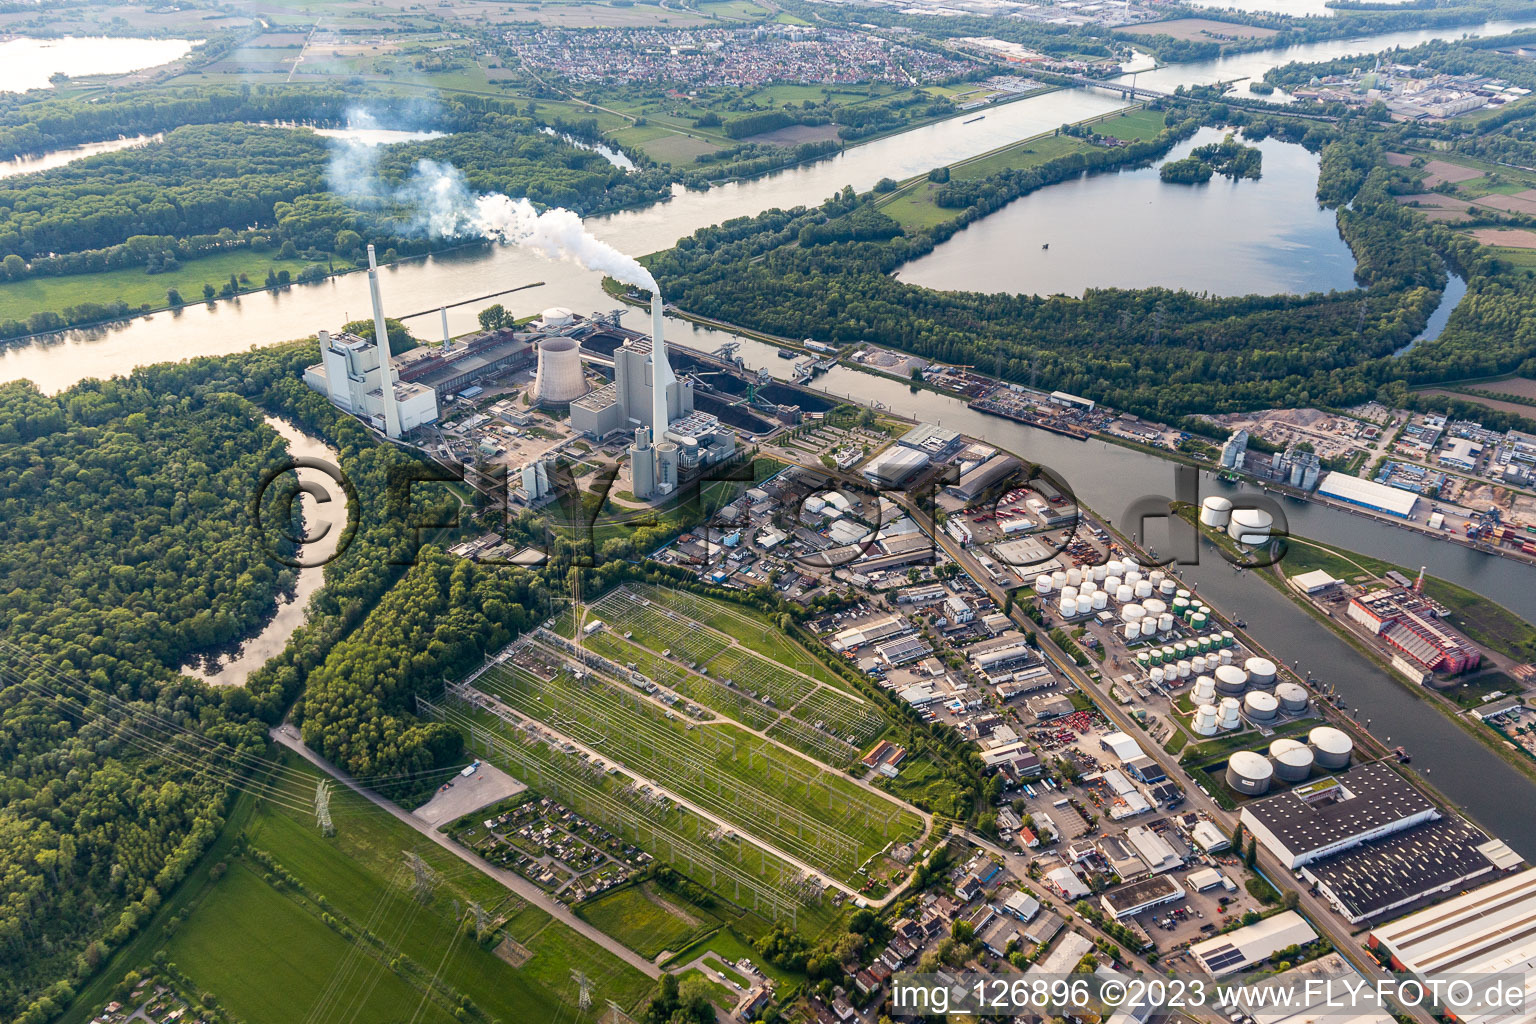 Aerial photograpy of EnBW hard coal power plant on the Rhine in the district Daxlanden in Karlsruhe in the state Baden-Wuerttemberg, Germany